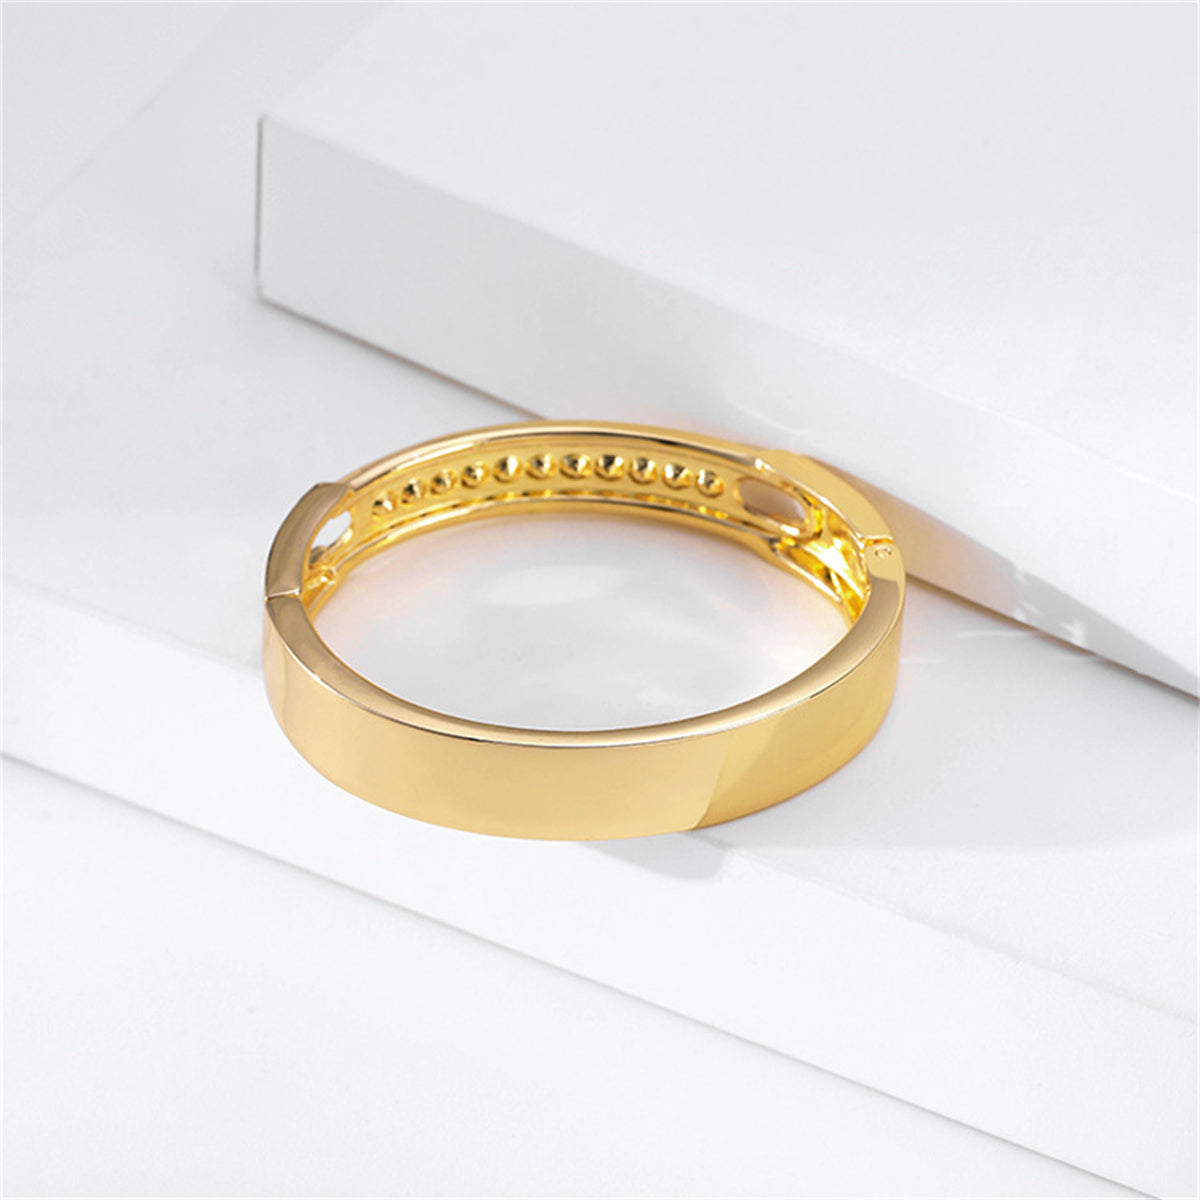 Cubic Zirconia & 18K Gold-Plated Bangle